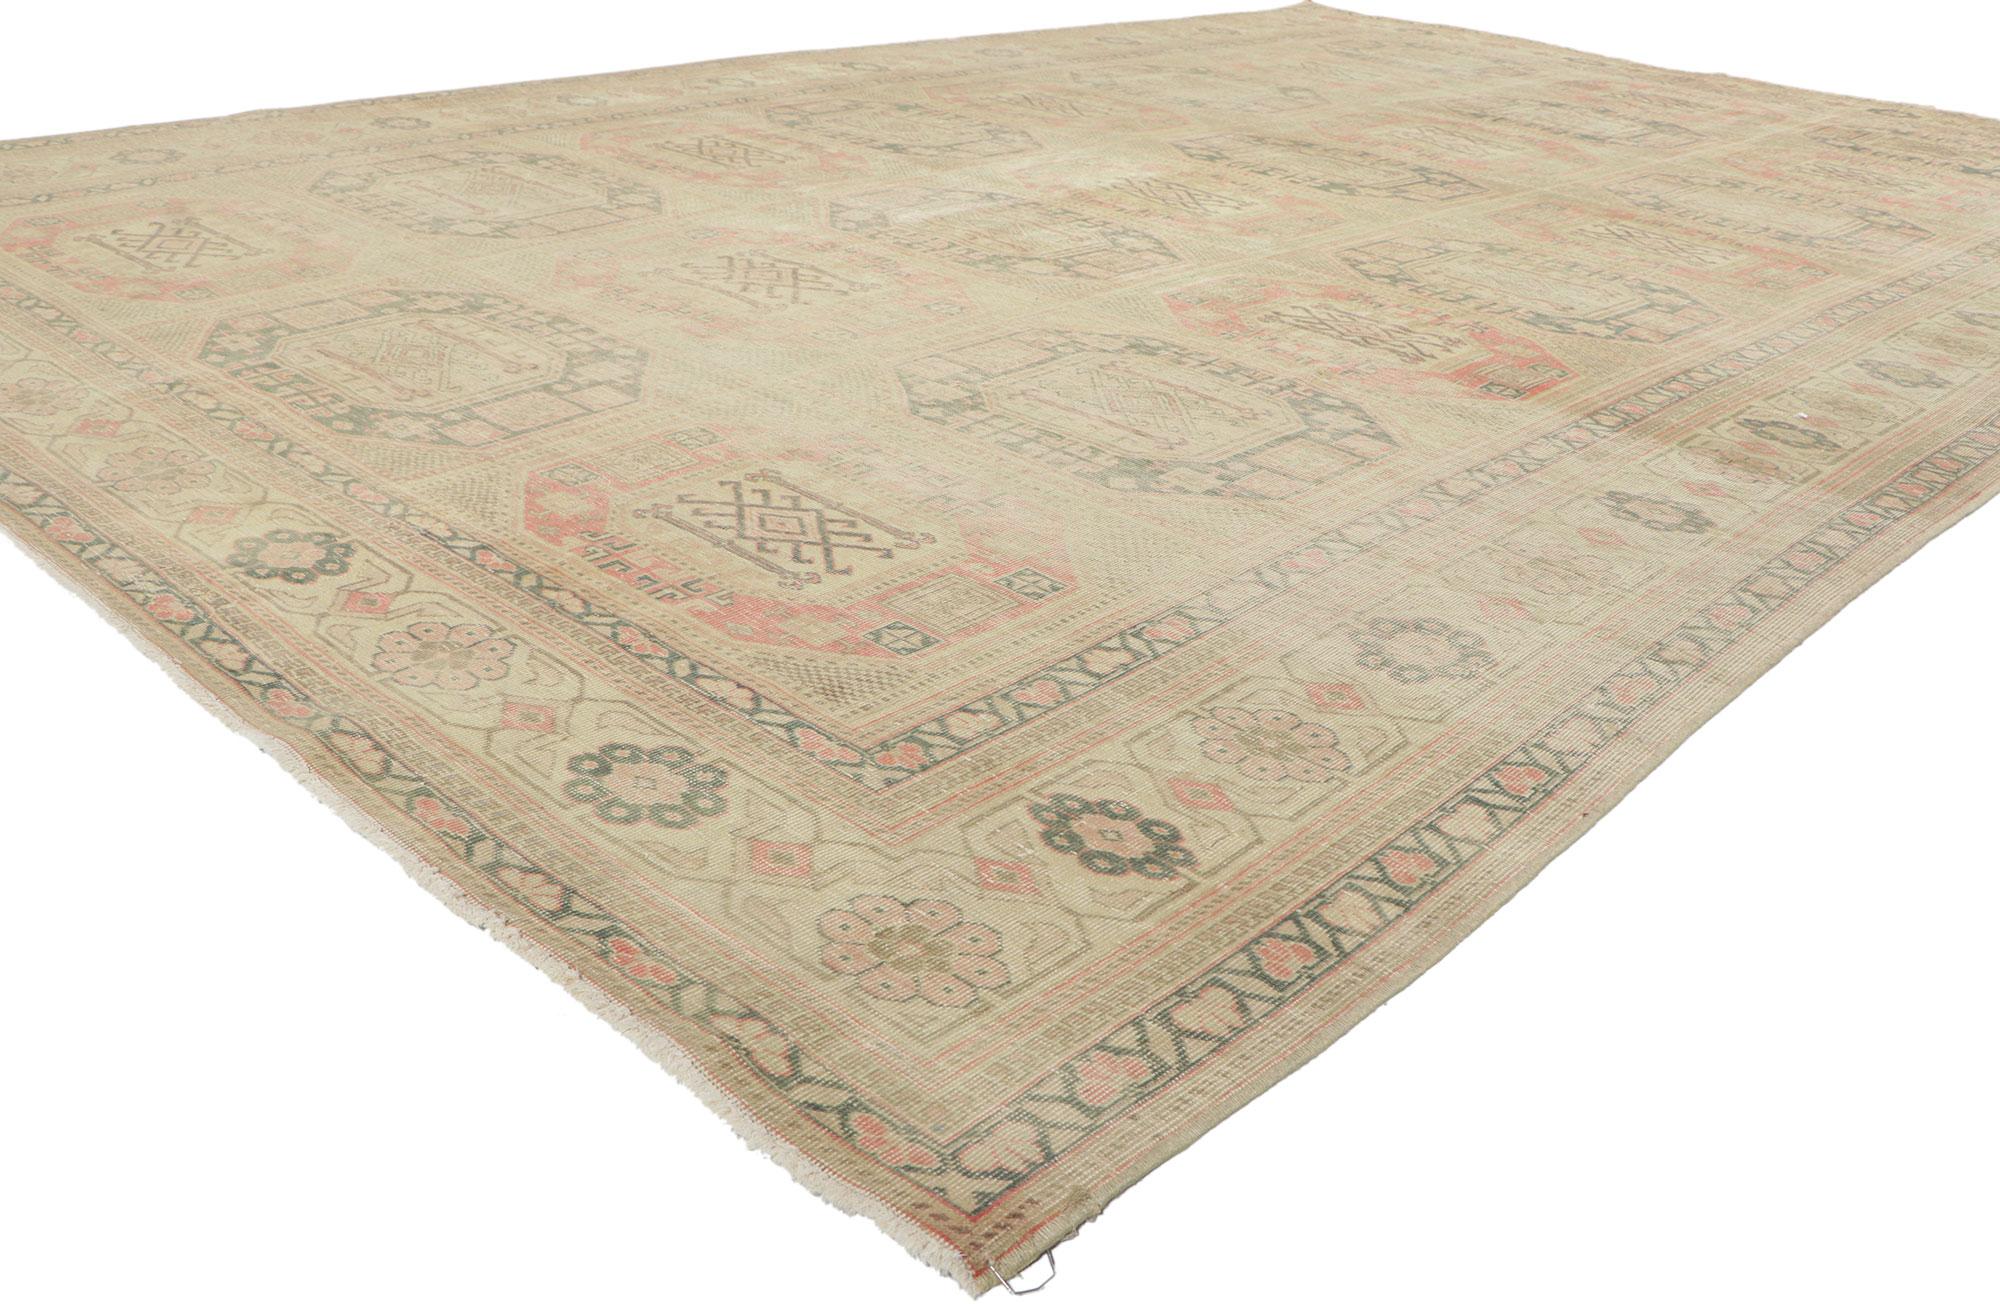 ?52140 vintage Turkish Sivas rug, 08'03 x 12'09.
Displaying nomadic charm with incredible detail and texture, this hand knotted vintage Turkish Sivas rug is a captivating vision of woven beauty. The Tekke Turkmen design and neutral colors woven